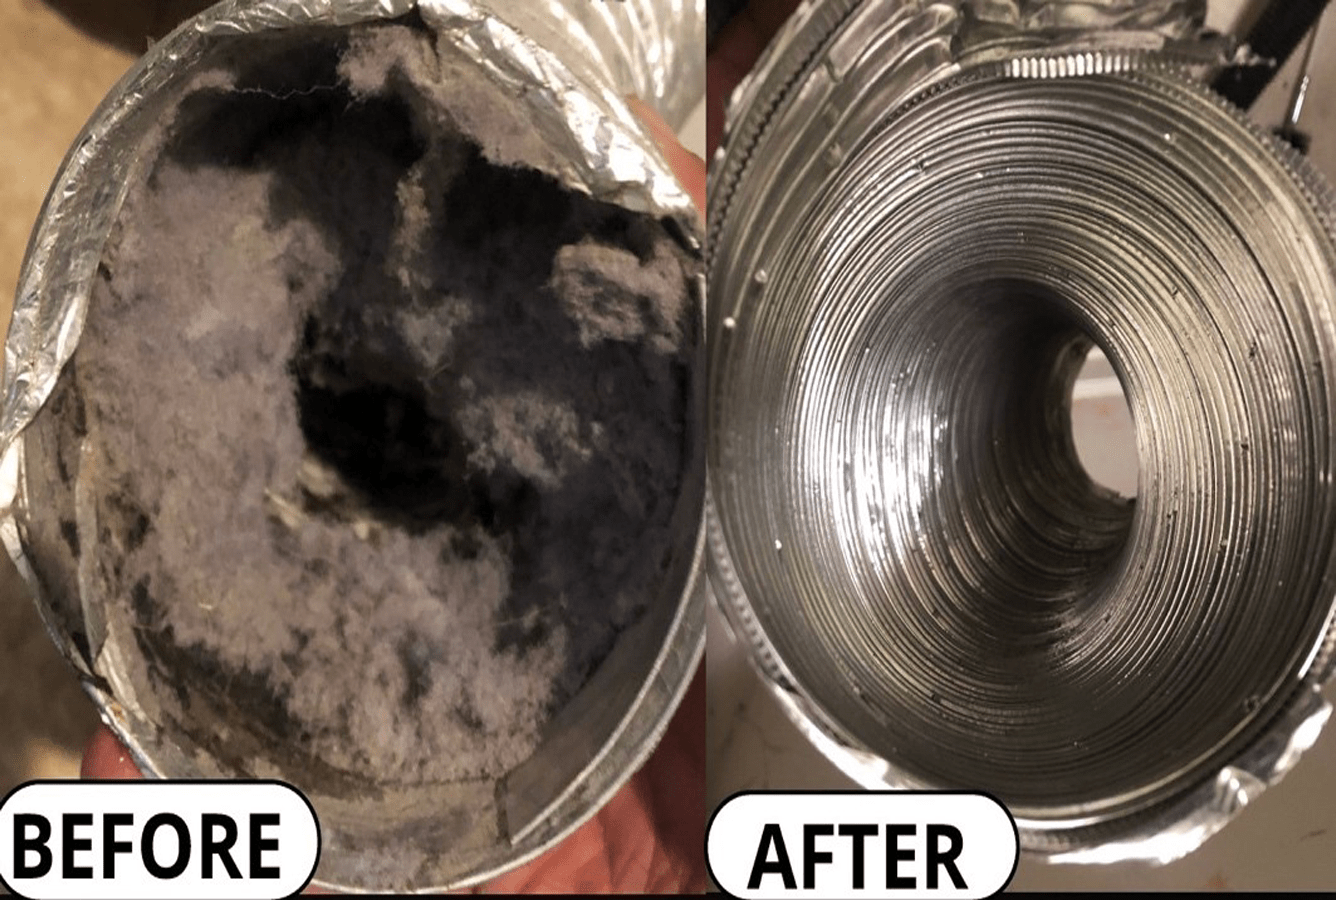 before and after dryer clean